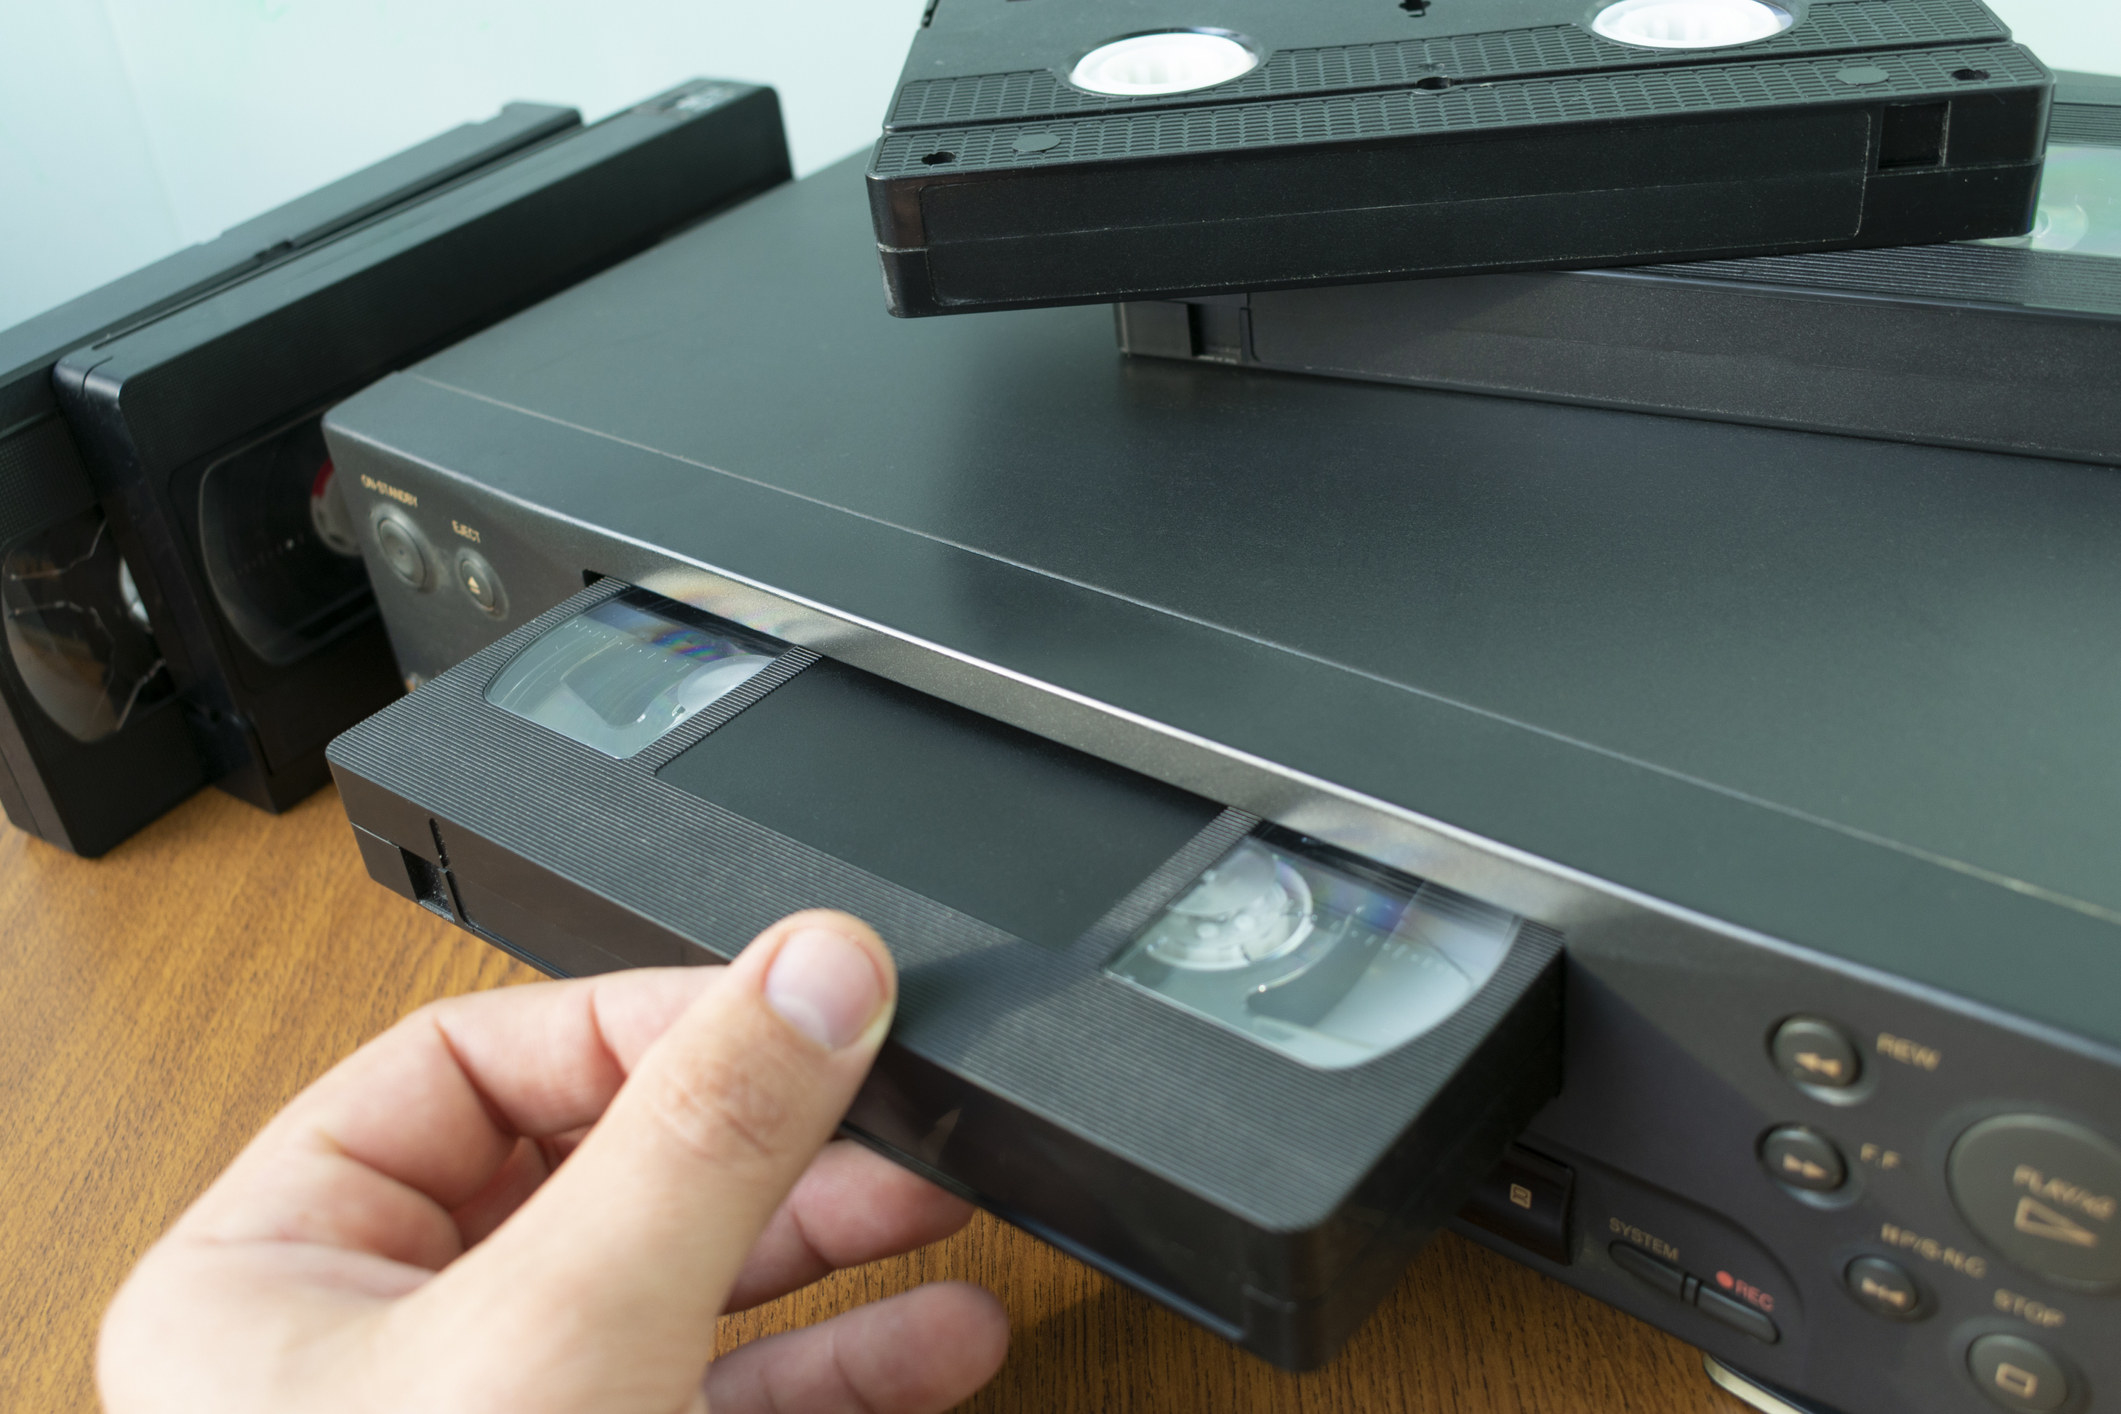 Someone putting a VHS cassette into a VCR